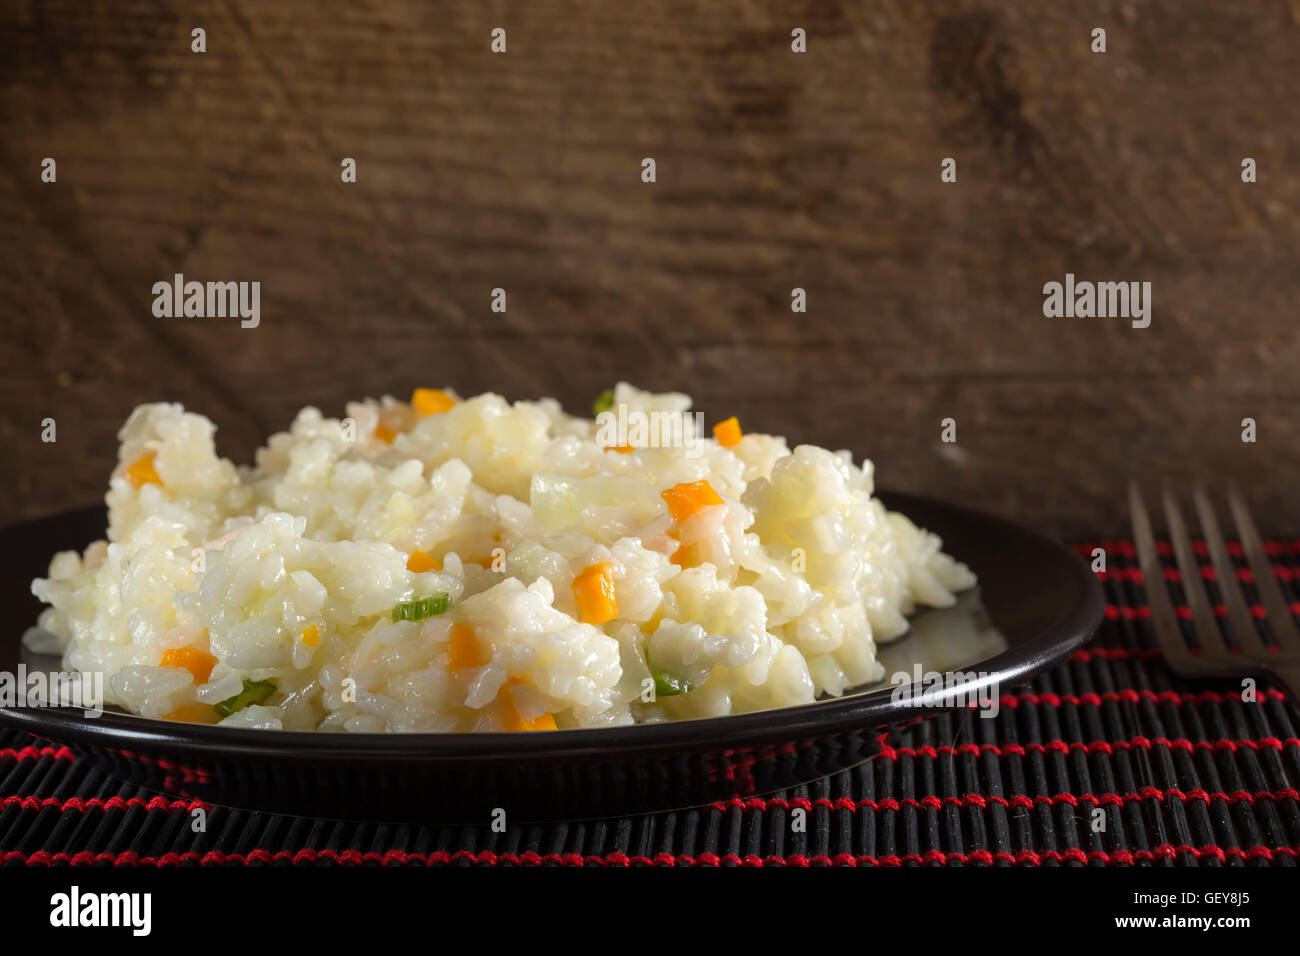 A plate of rice with vegetables. Selective focus. Stock Photo